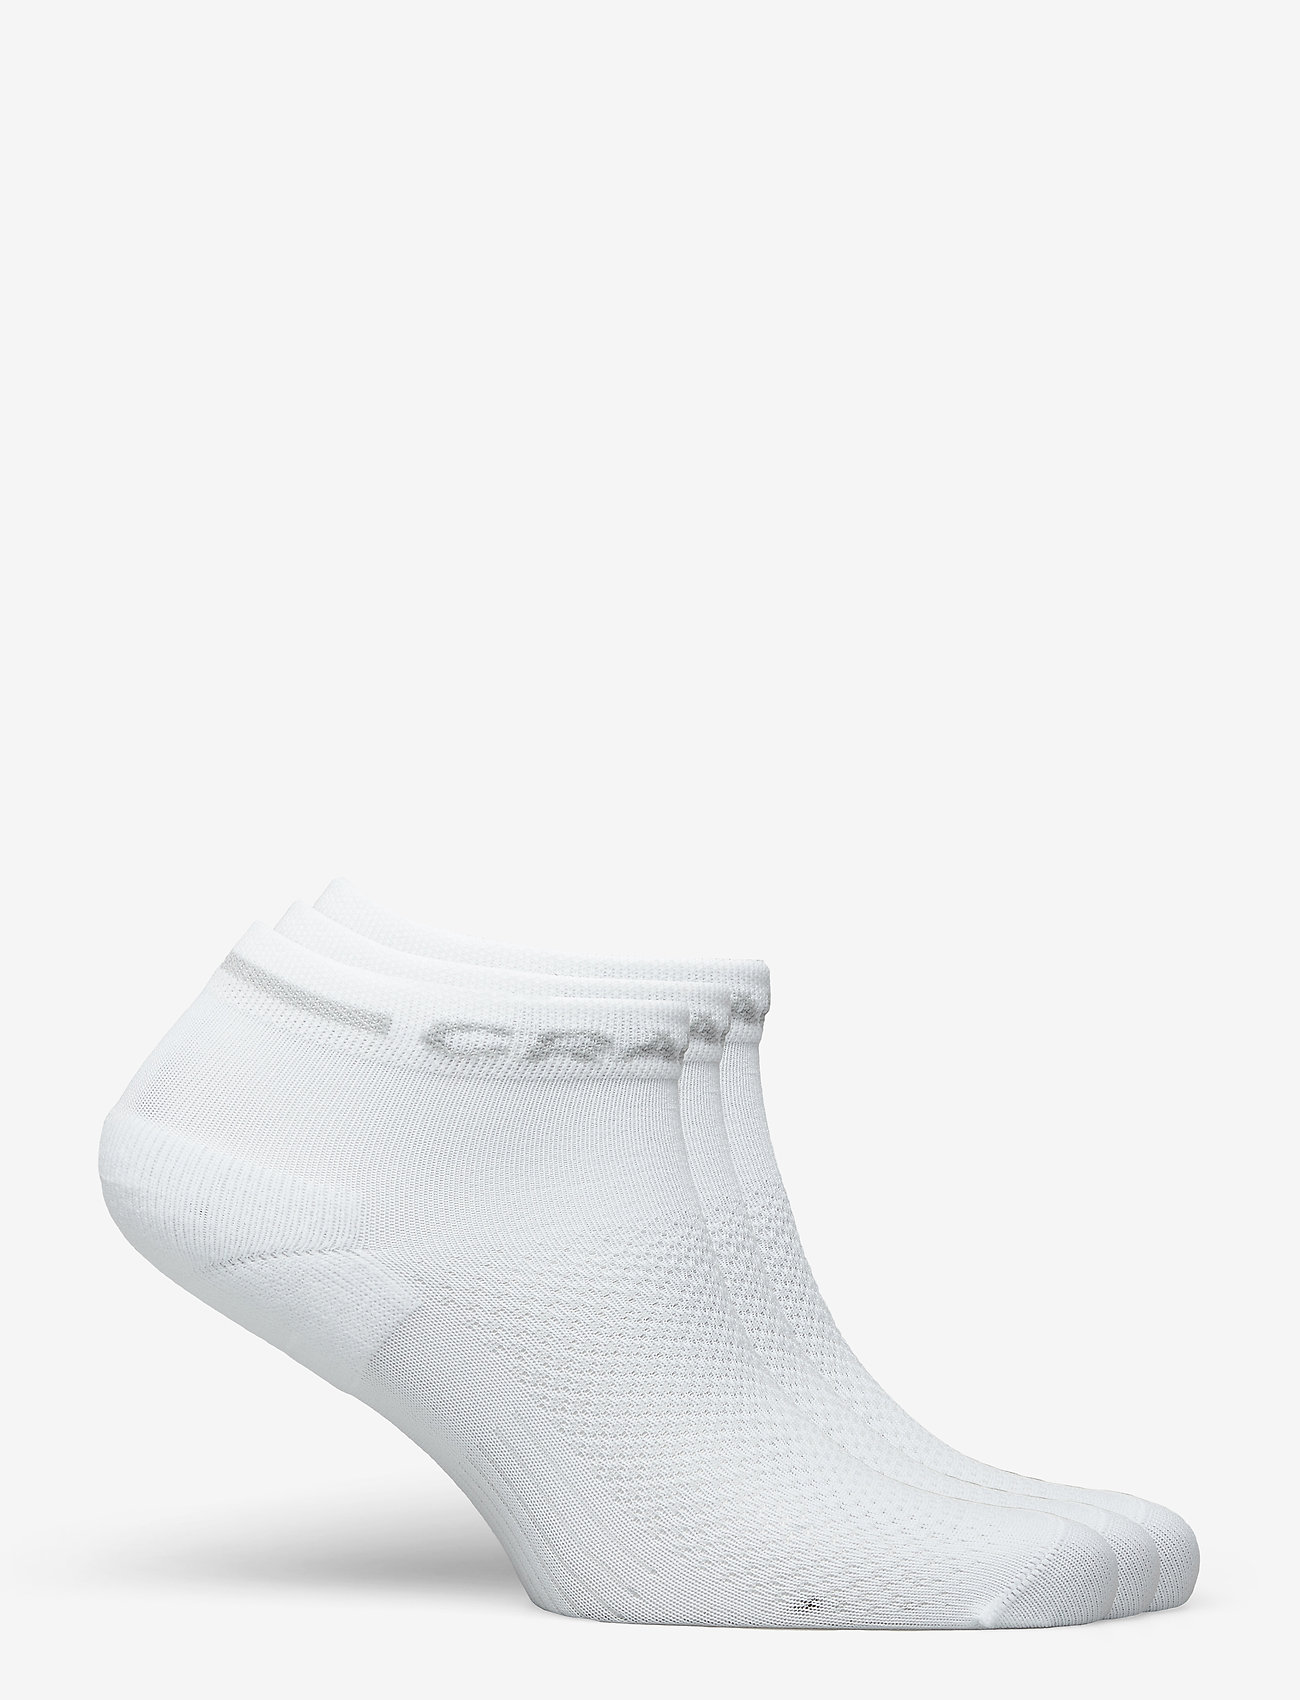 Craft Chaussettes Core Dry Mid Sock 3-Pack 1910637